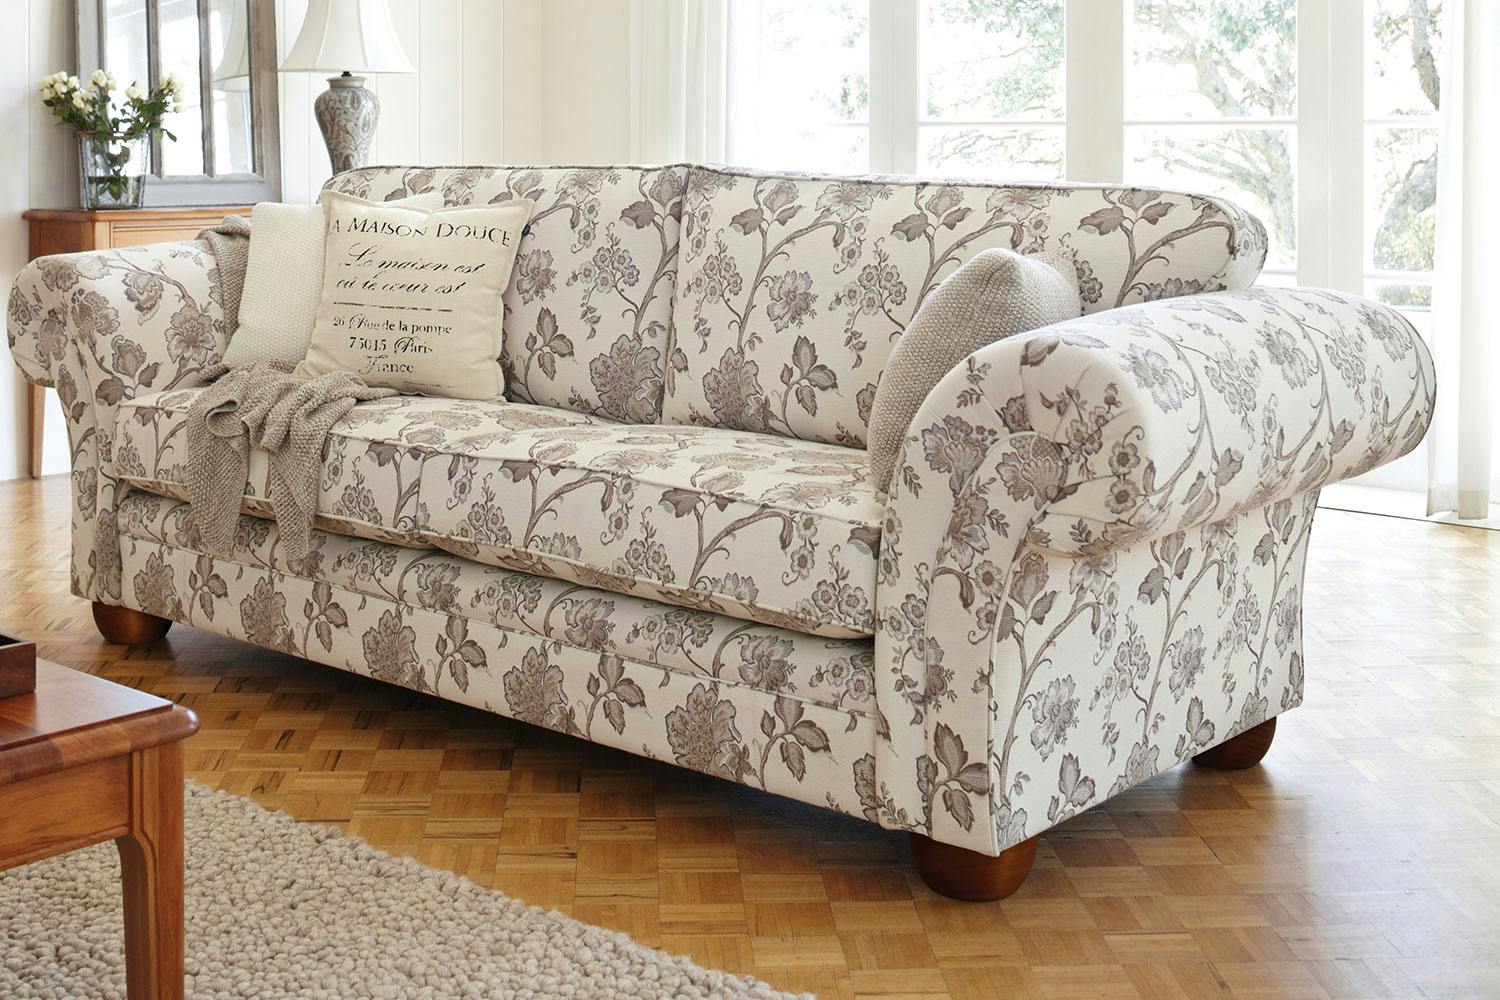 62 Exquisite capella 3 seater fabric sofa bed You Won't Be Disappointed